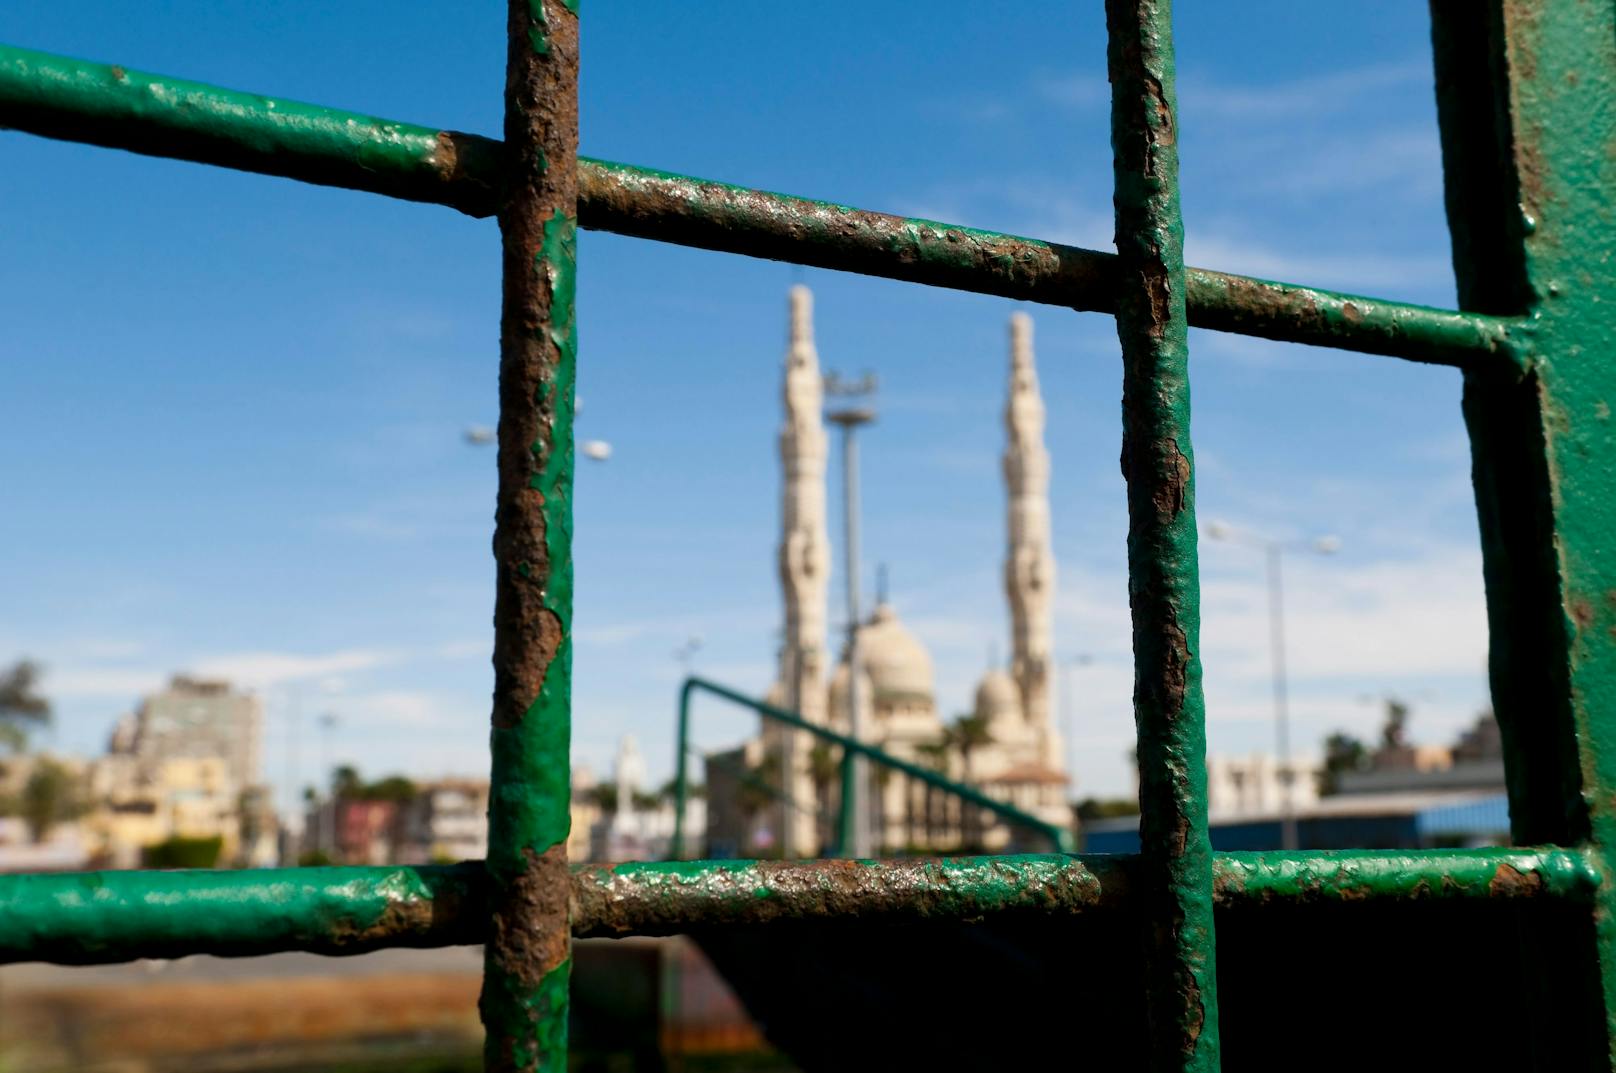 The view of a mosque through a rusting iron cage. Location: Port Said, Egypt